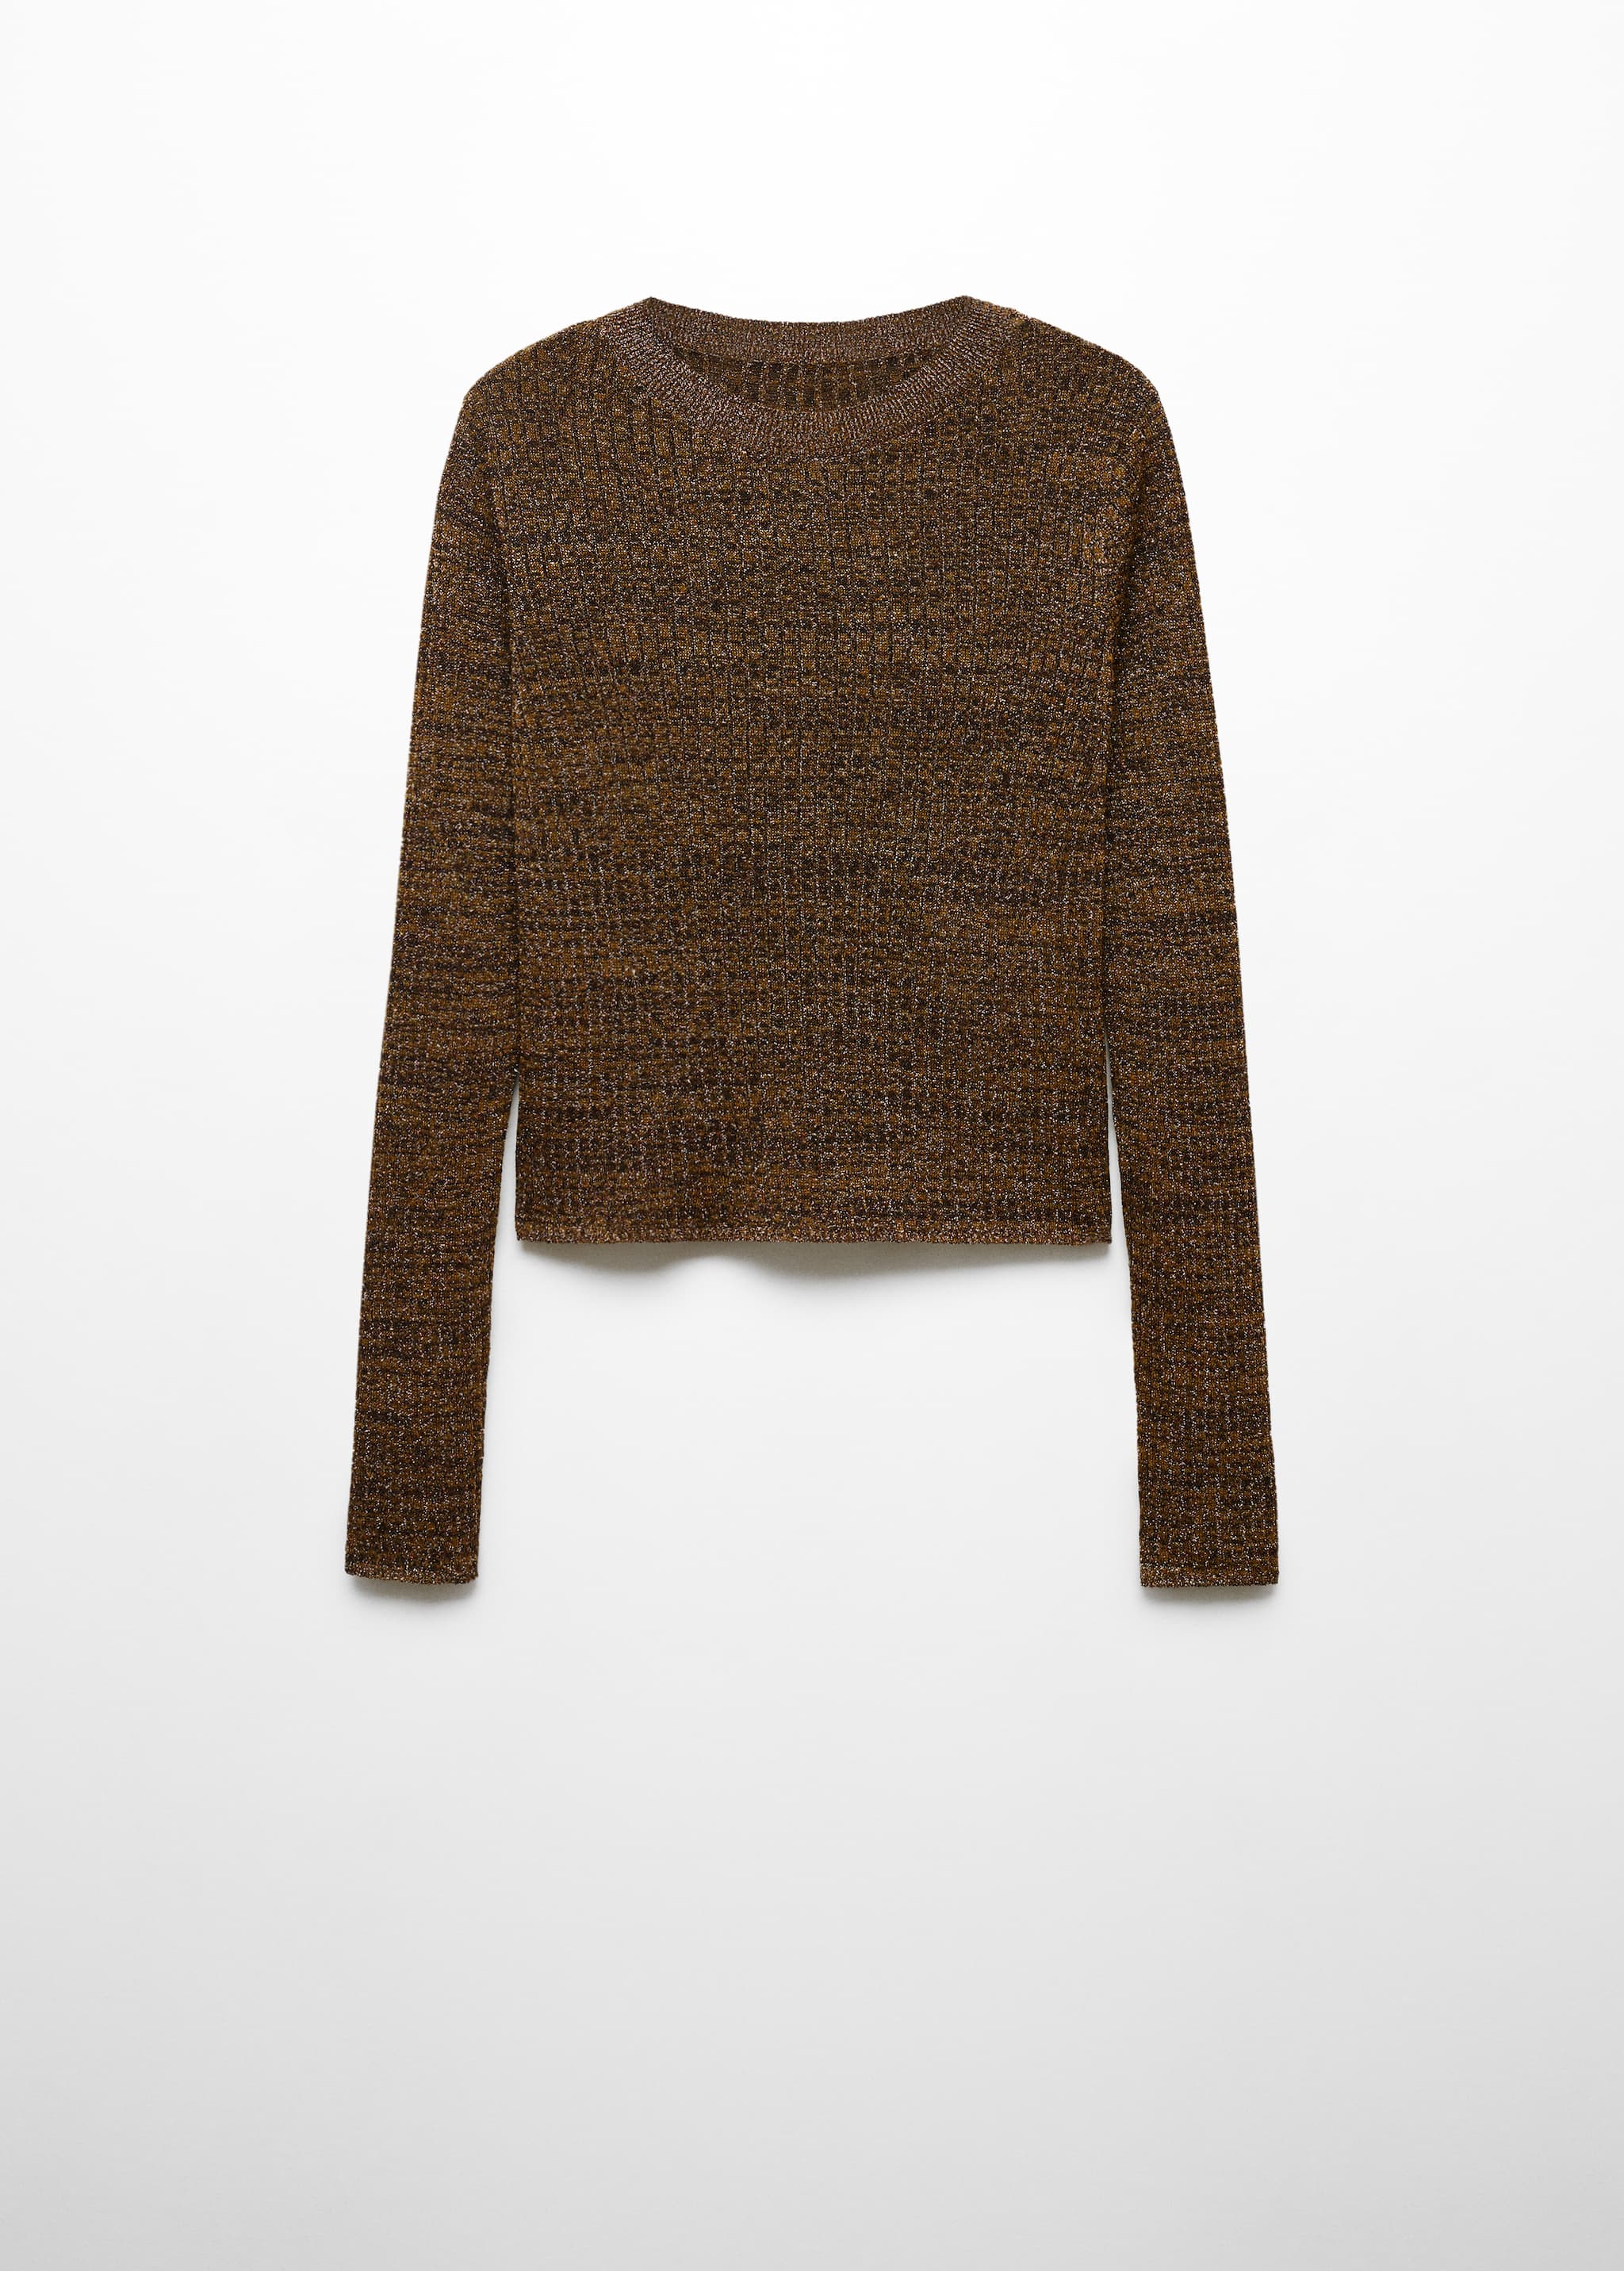 Crewneck lurex sweater - Article without model